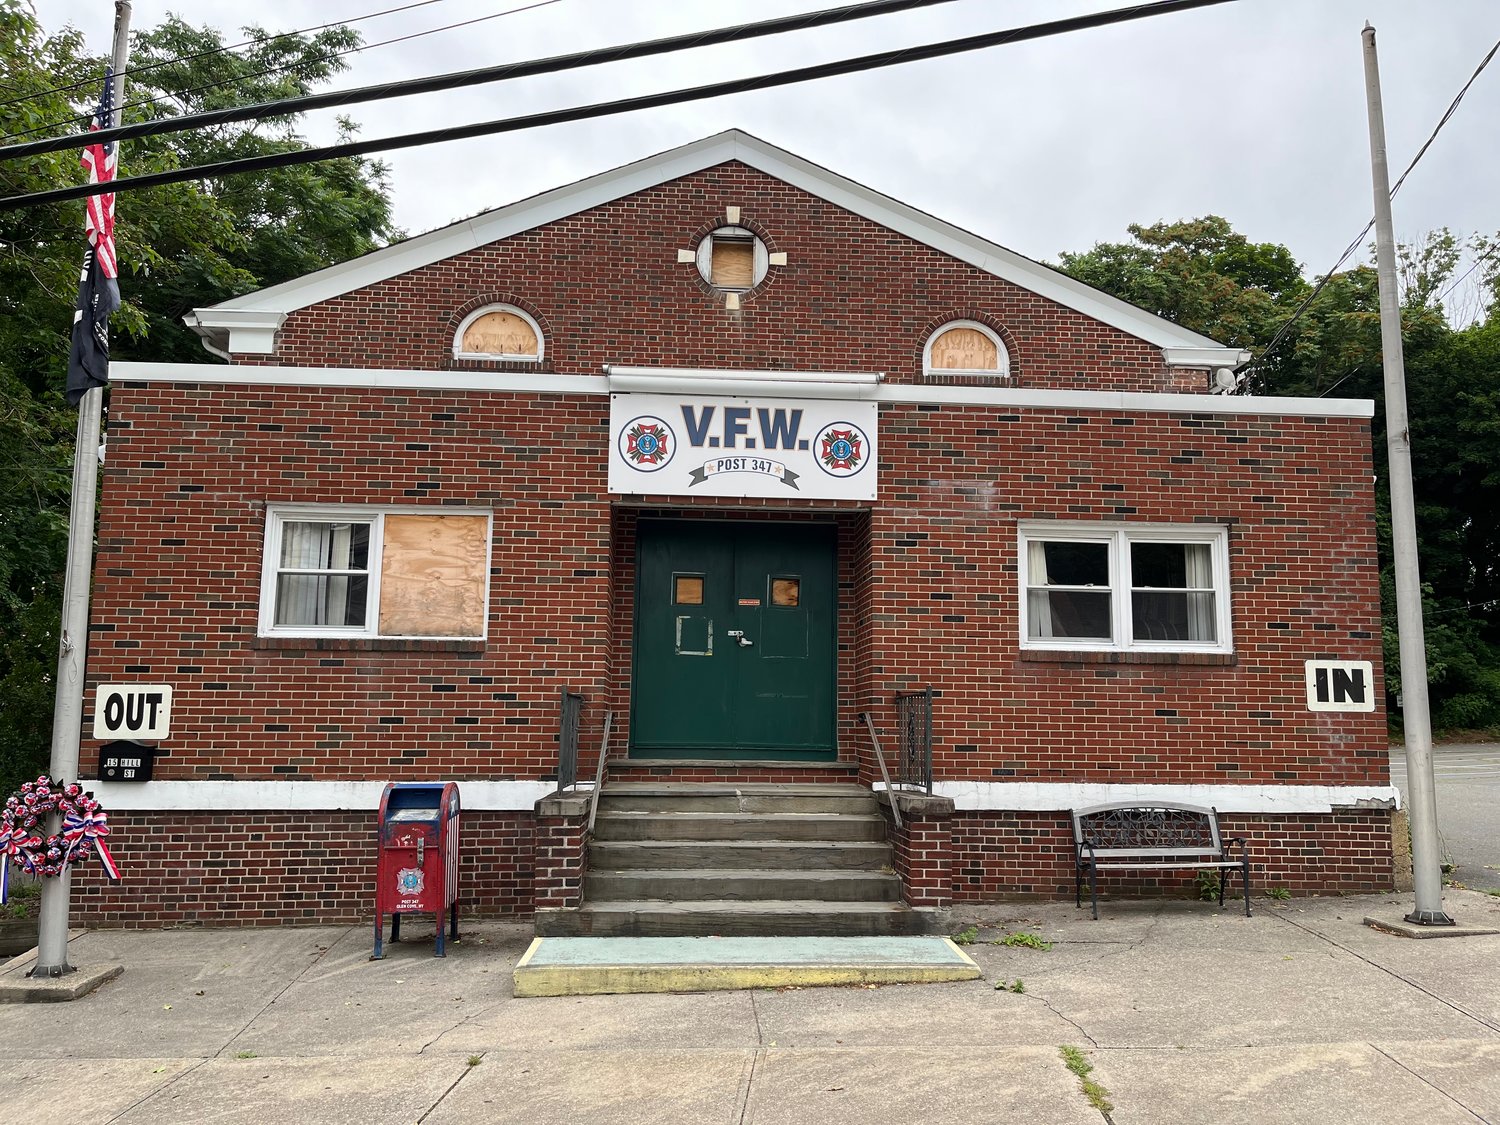 The Glen Cove Veterans of Foreign Wars Post 347 was damaged in a fire last August, and has applied to receive money from the updated American Rescue Plan Act.